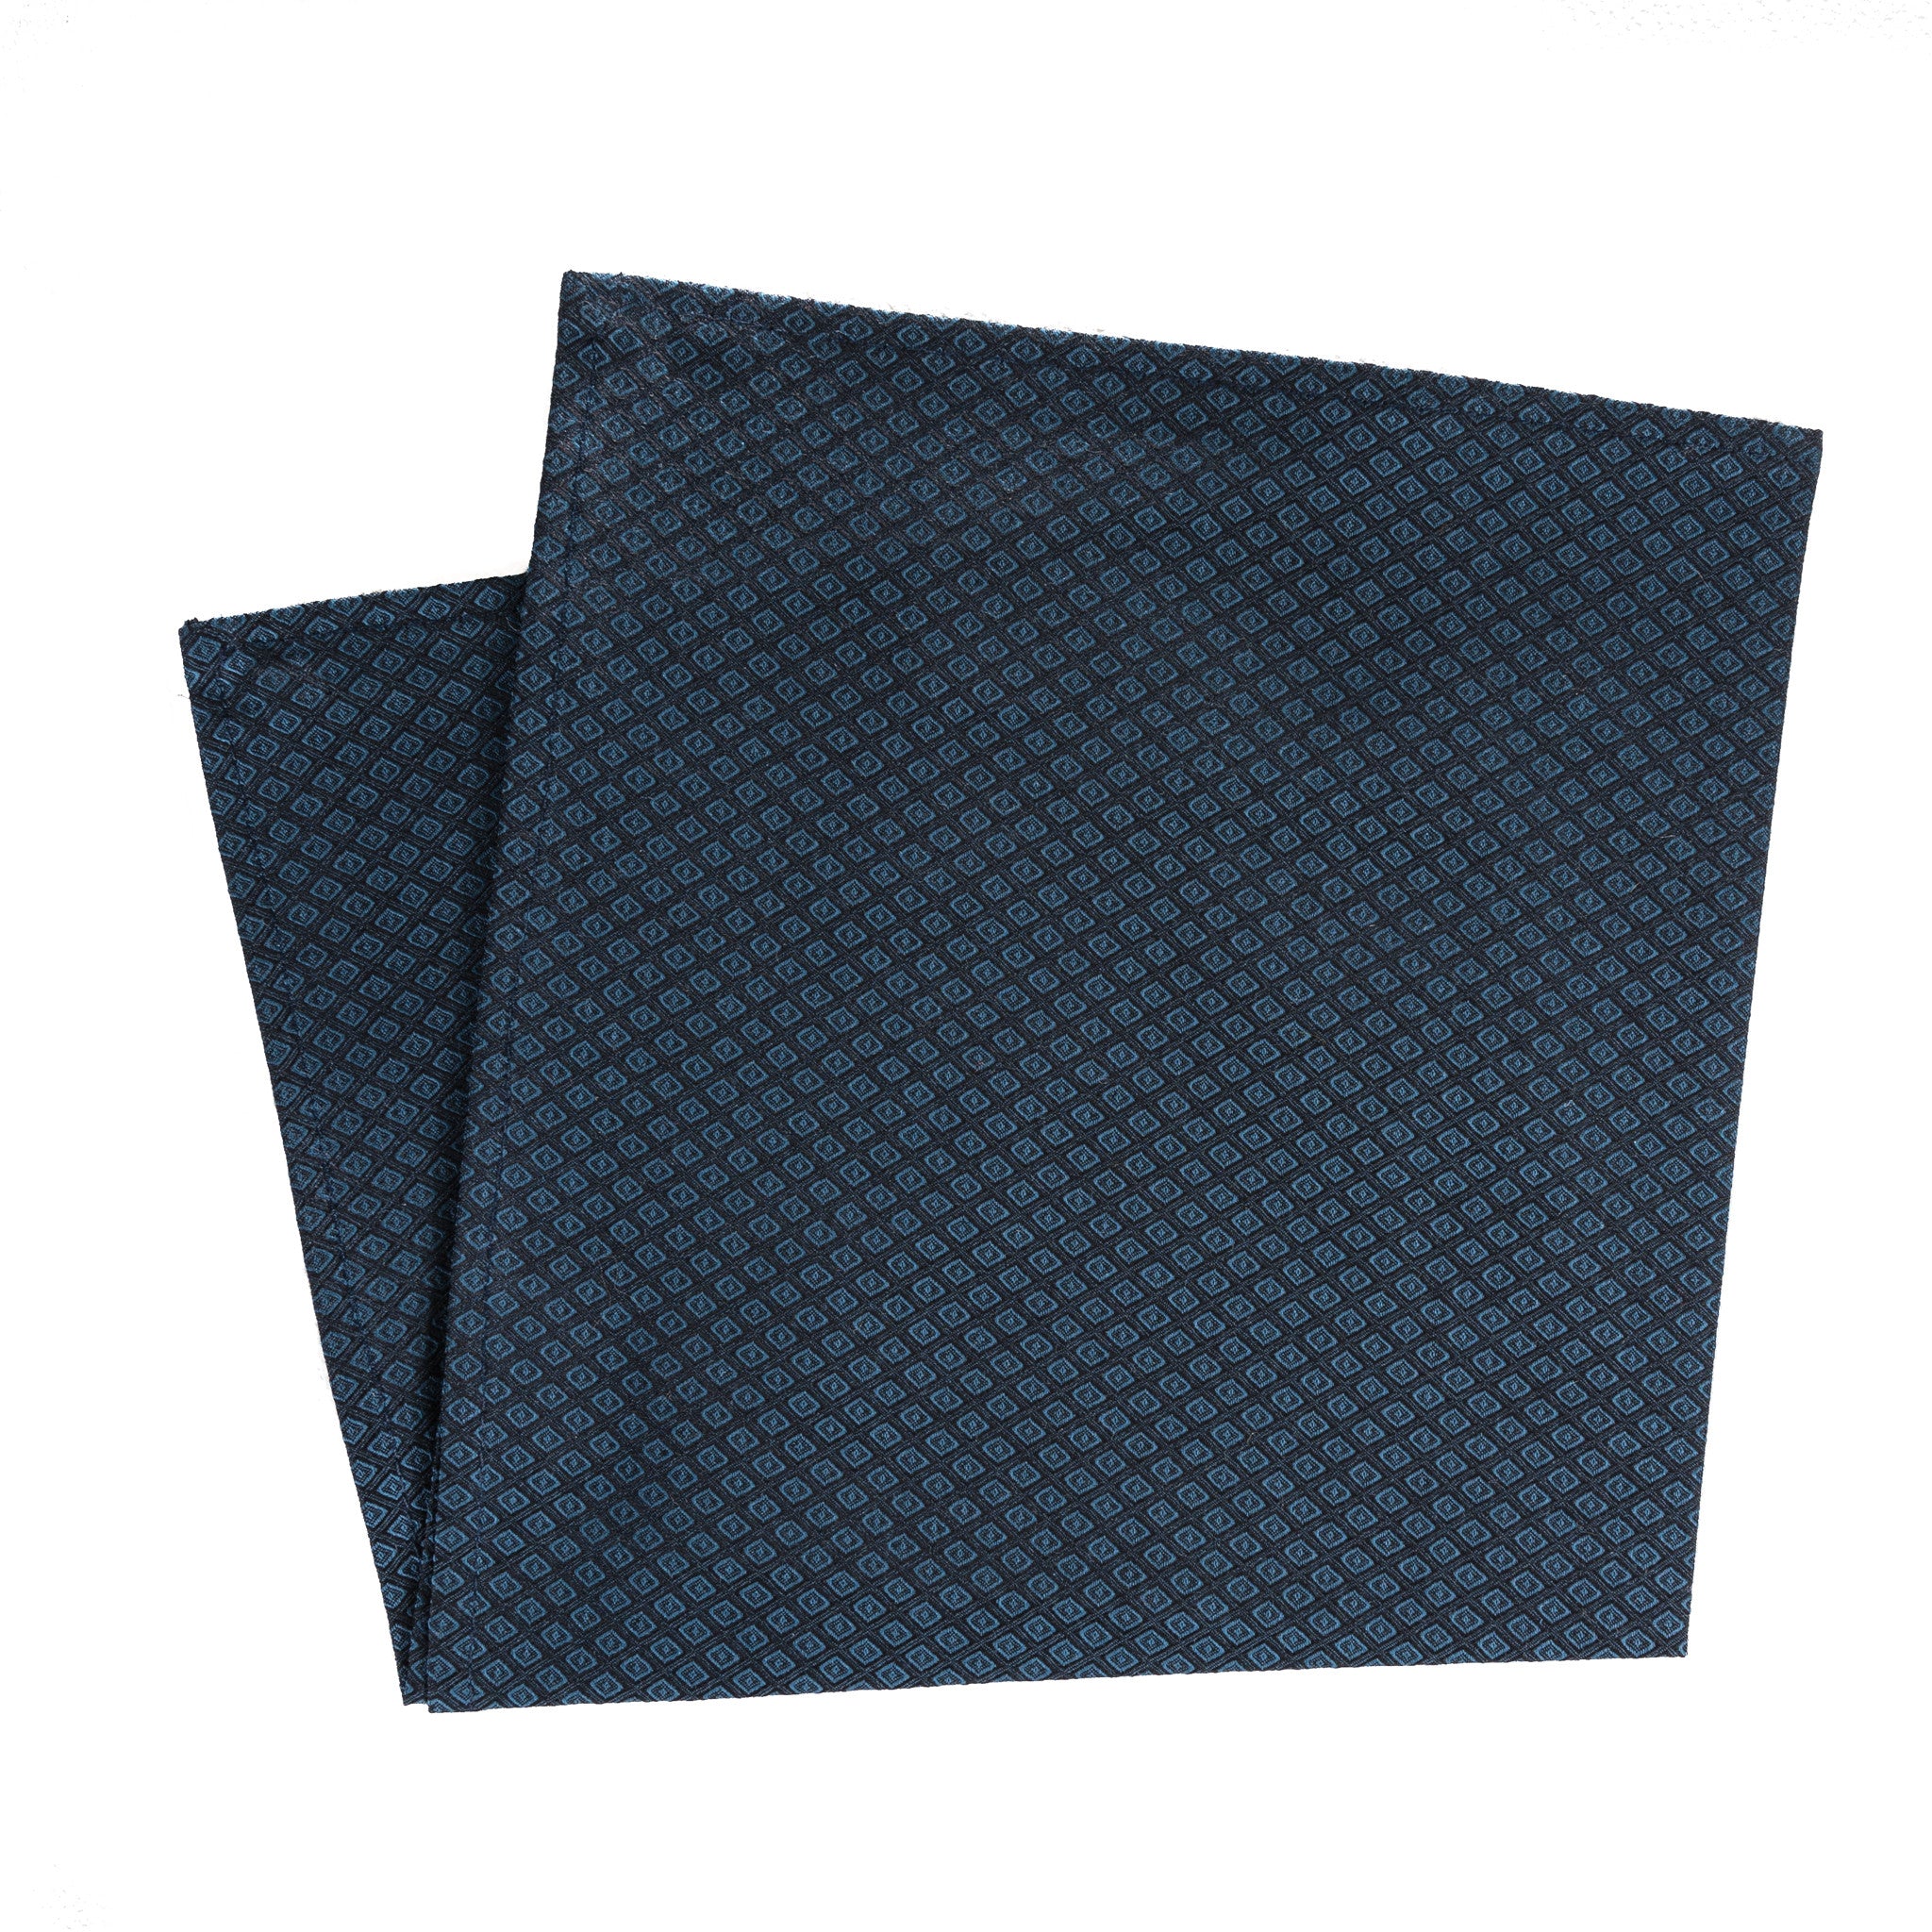 Dot-in-Diamond Grid Pocket Square (additional colors available)